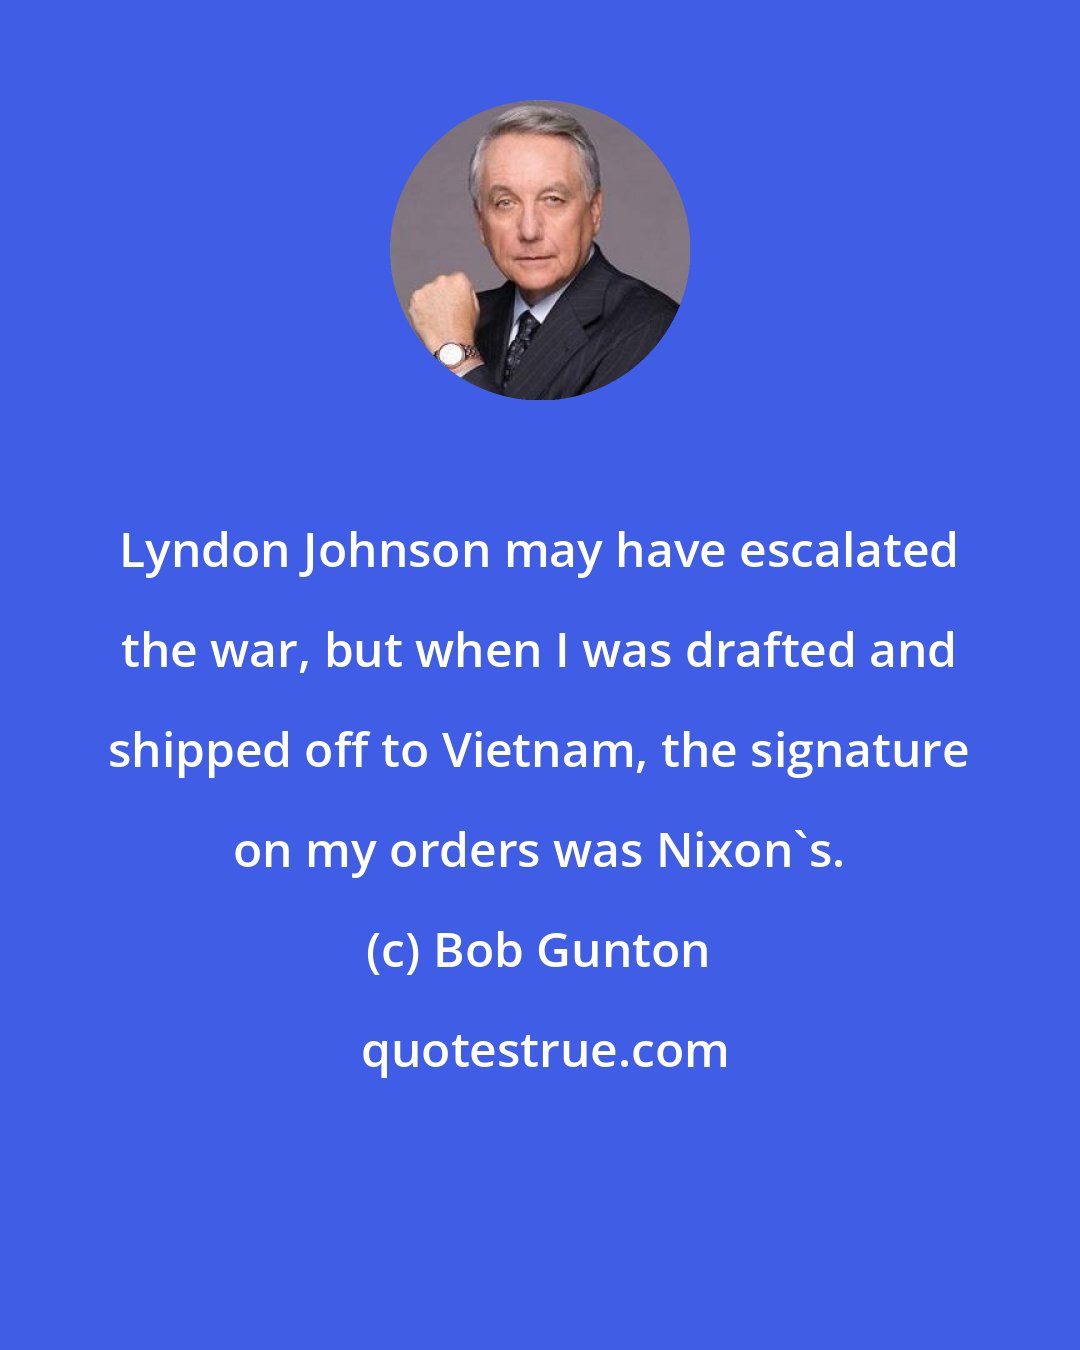 Bob Gunton: Lyndon Johnson may have escalated the war, but when I was drafted and shipped off to Vietnam, the signature on my orders was Nixon's.